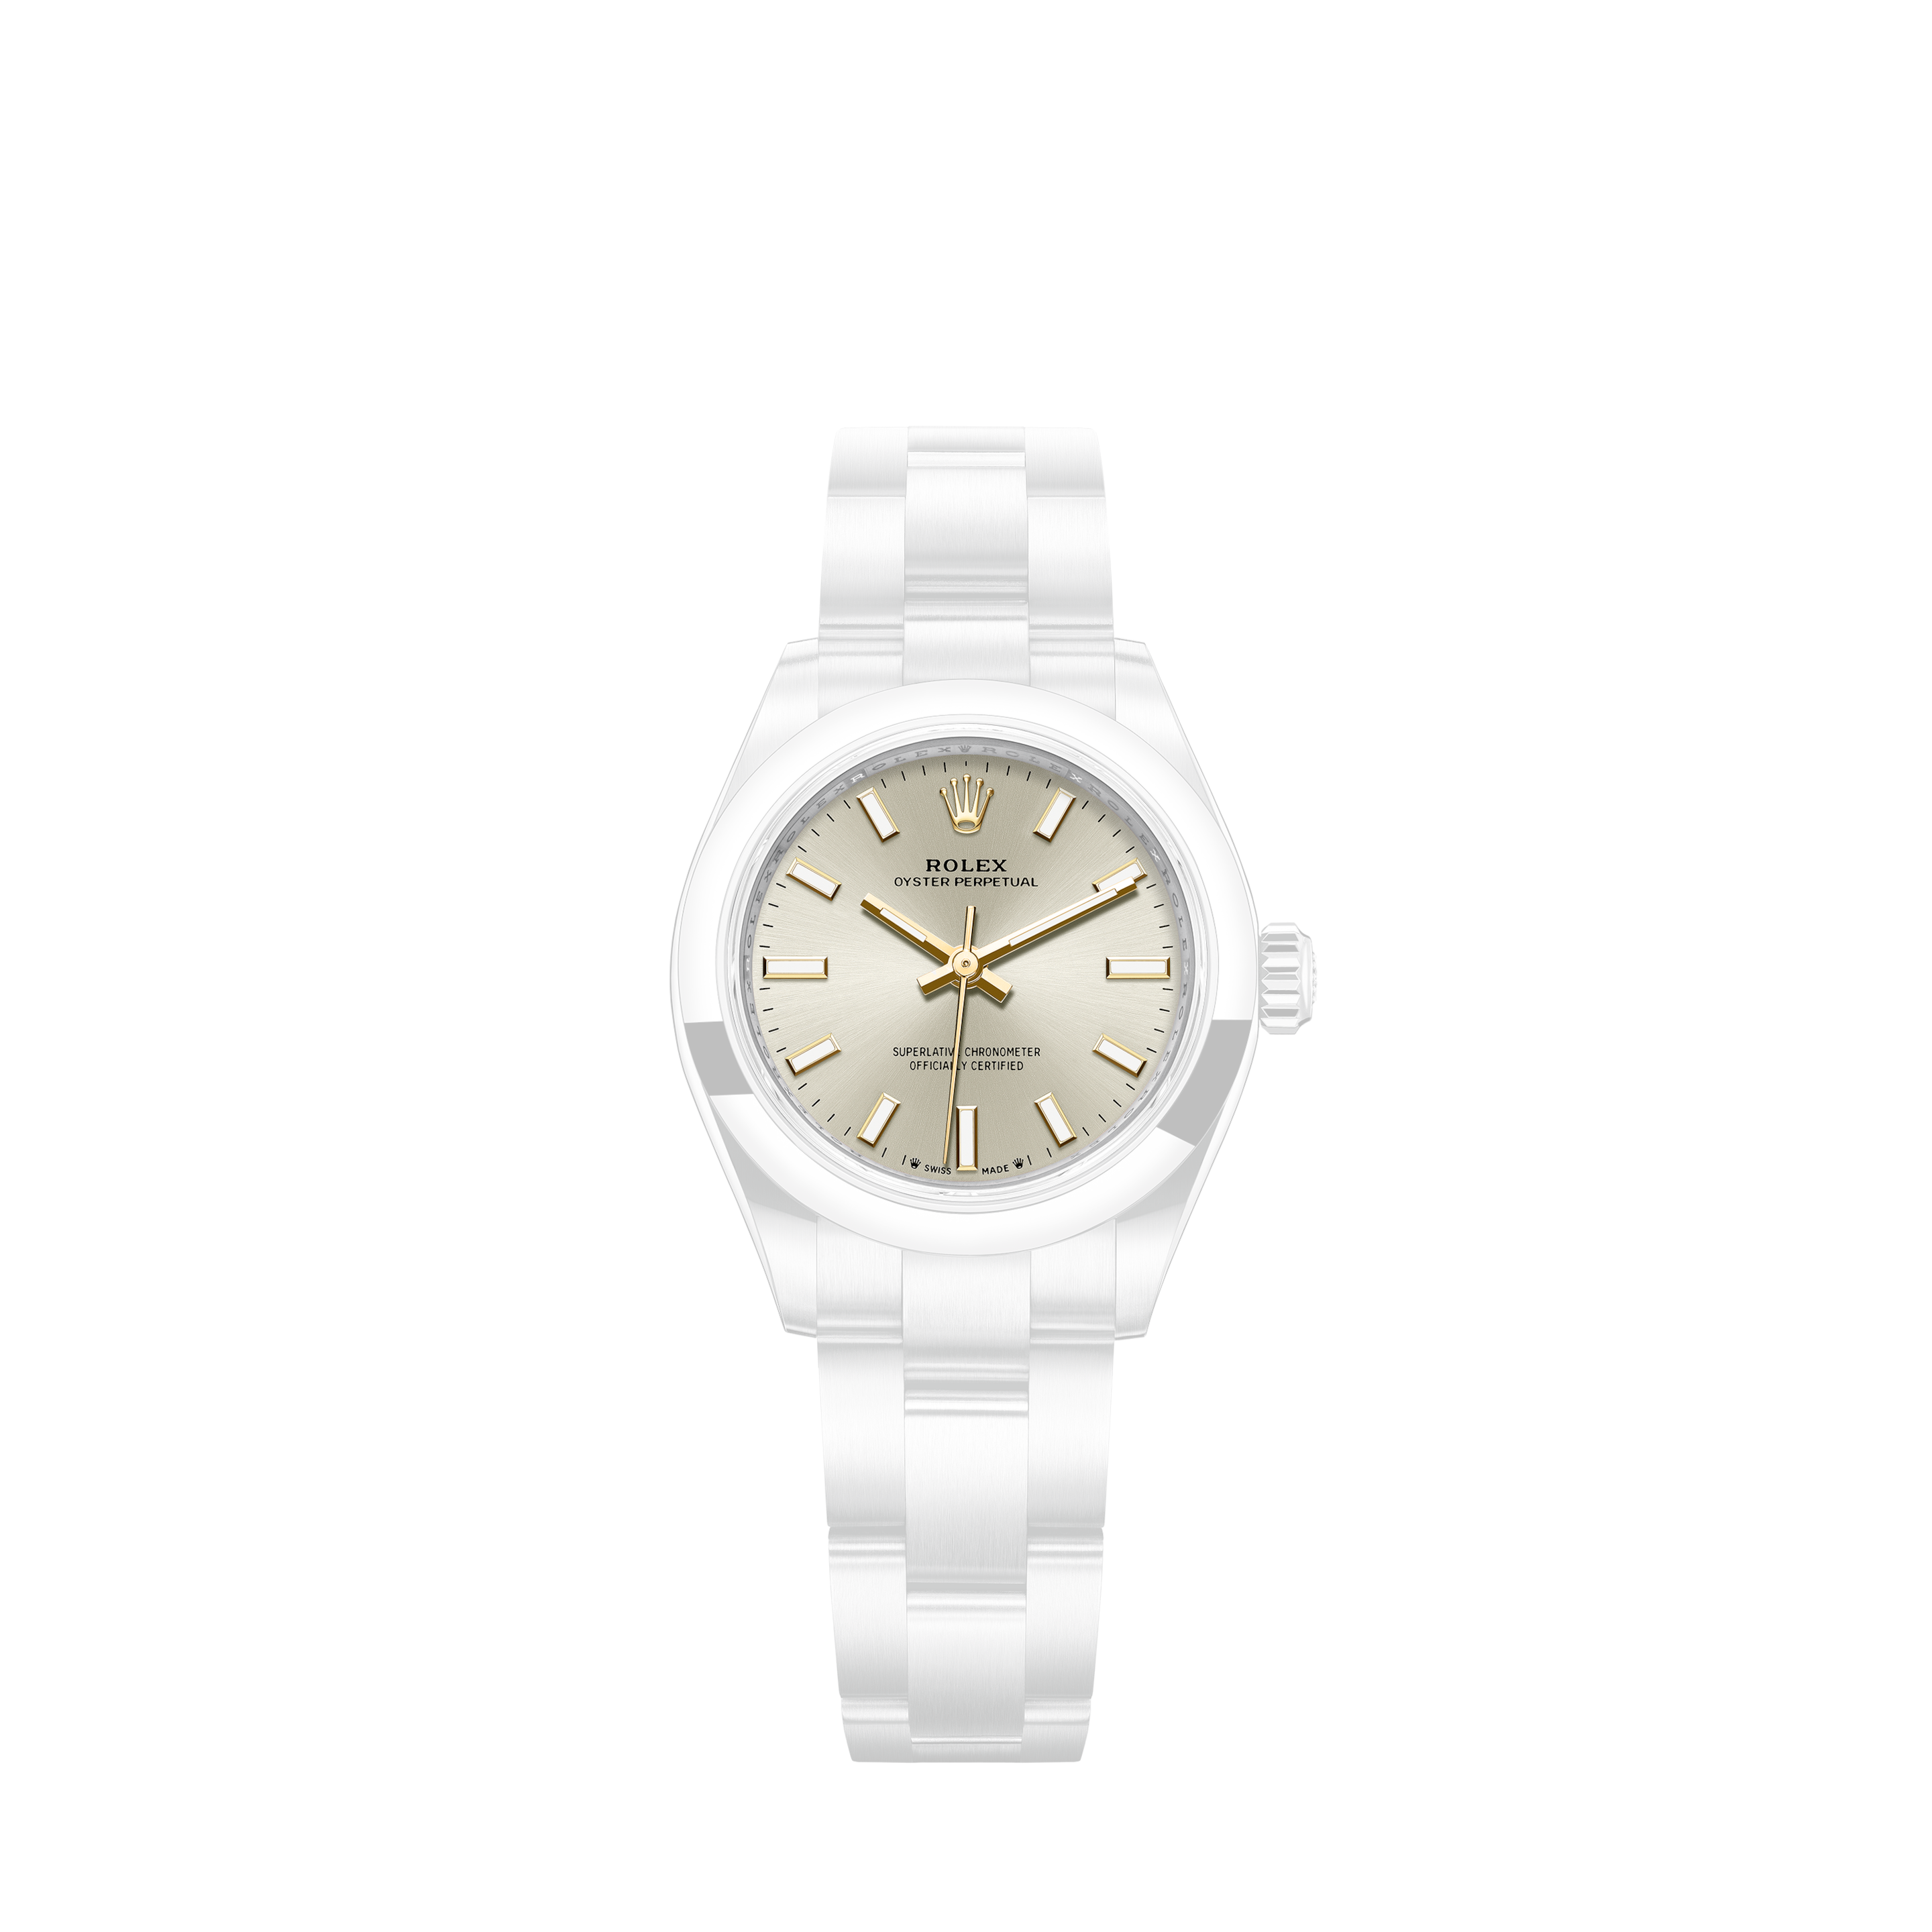 Rolex Datejust 36mm - Steel and Gold Yellow Gold - Domed Bezel - Jubilee 126203 WIJRolex Datejust 36mm - Steel and Gold Yellow Gold - Domed Bezel - Jubilee 126203 WRJ